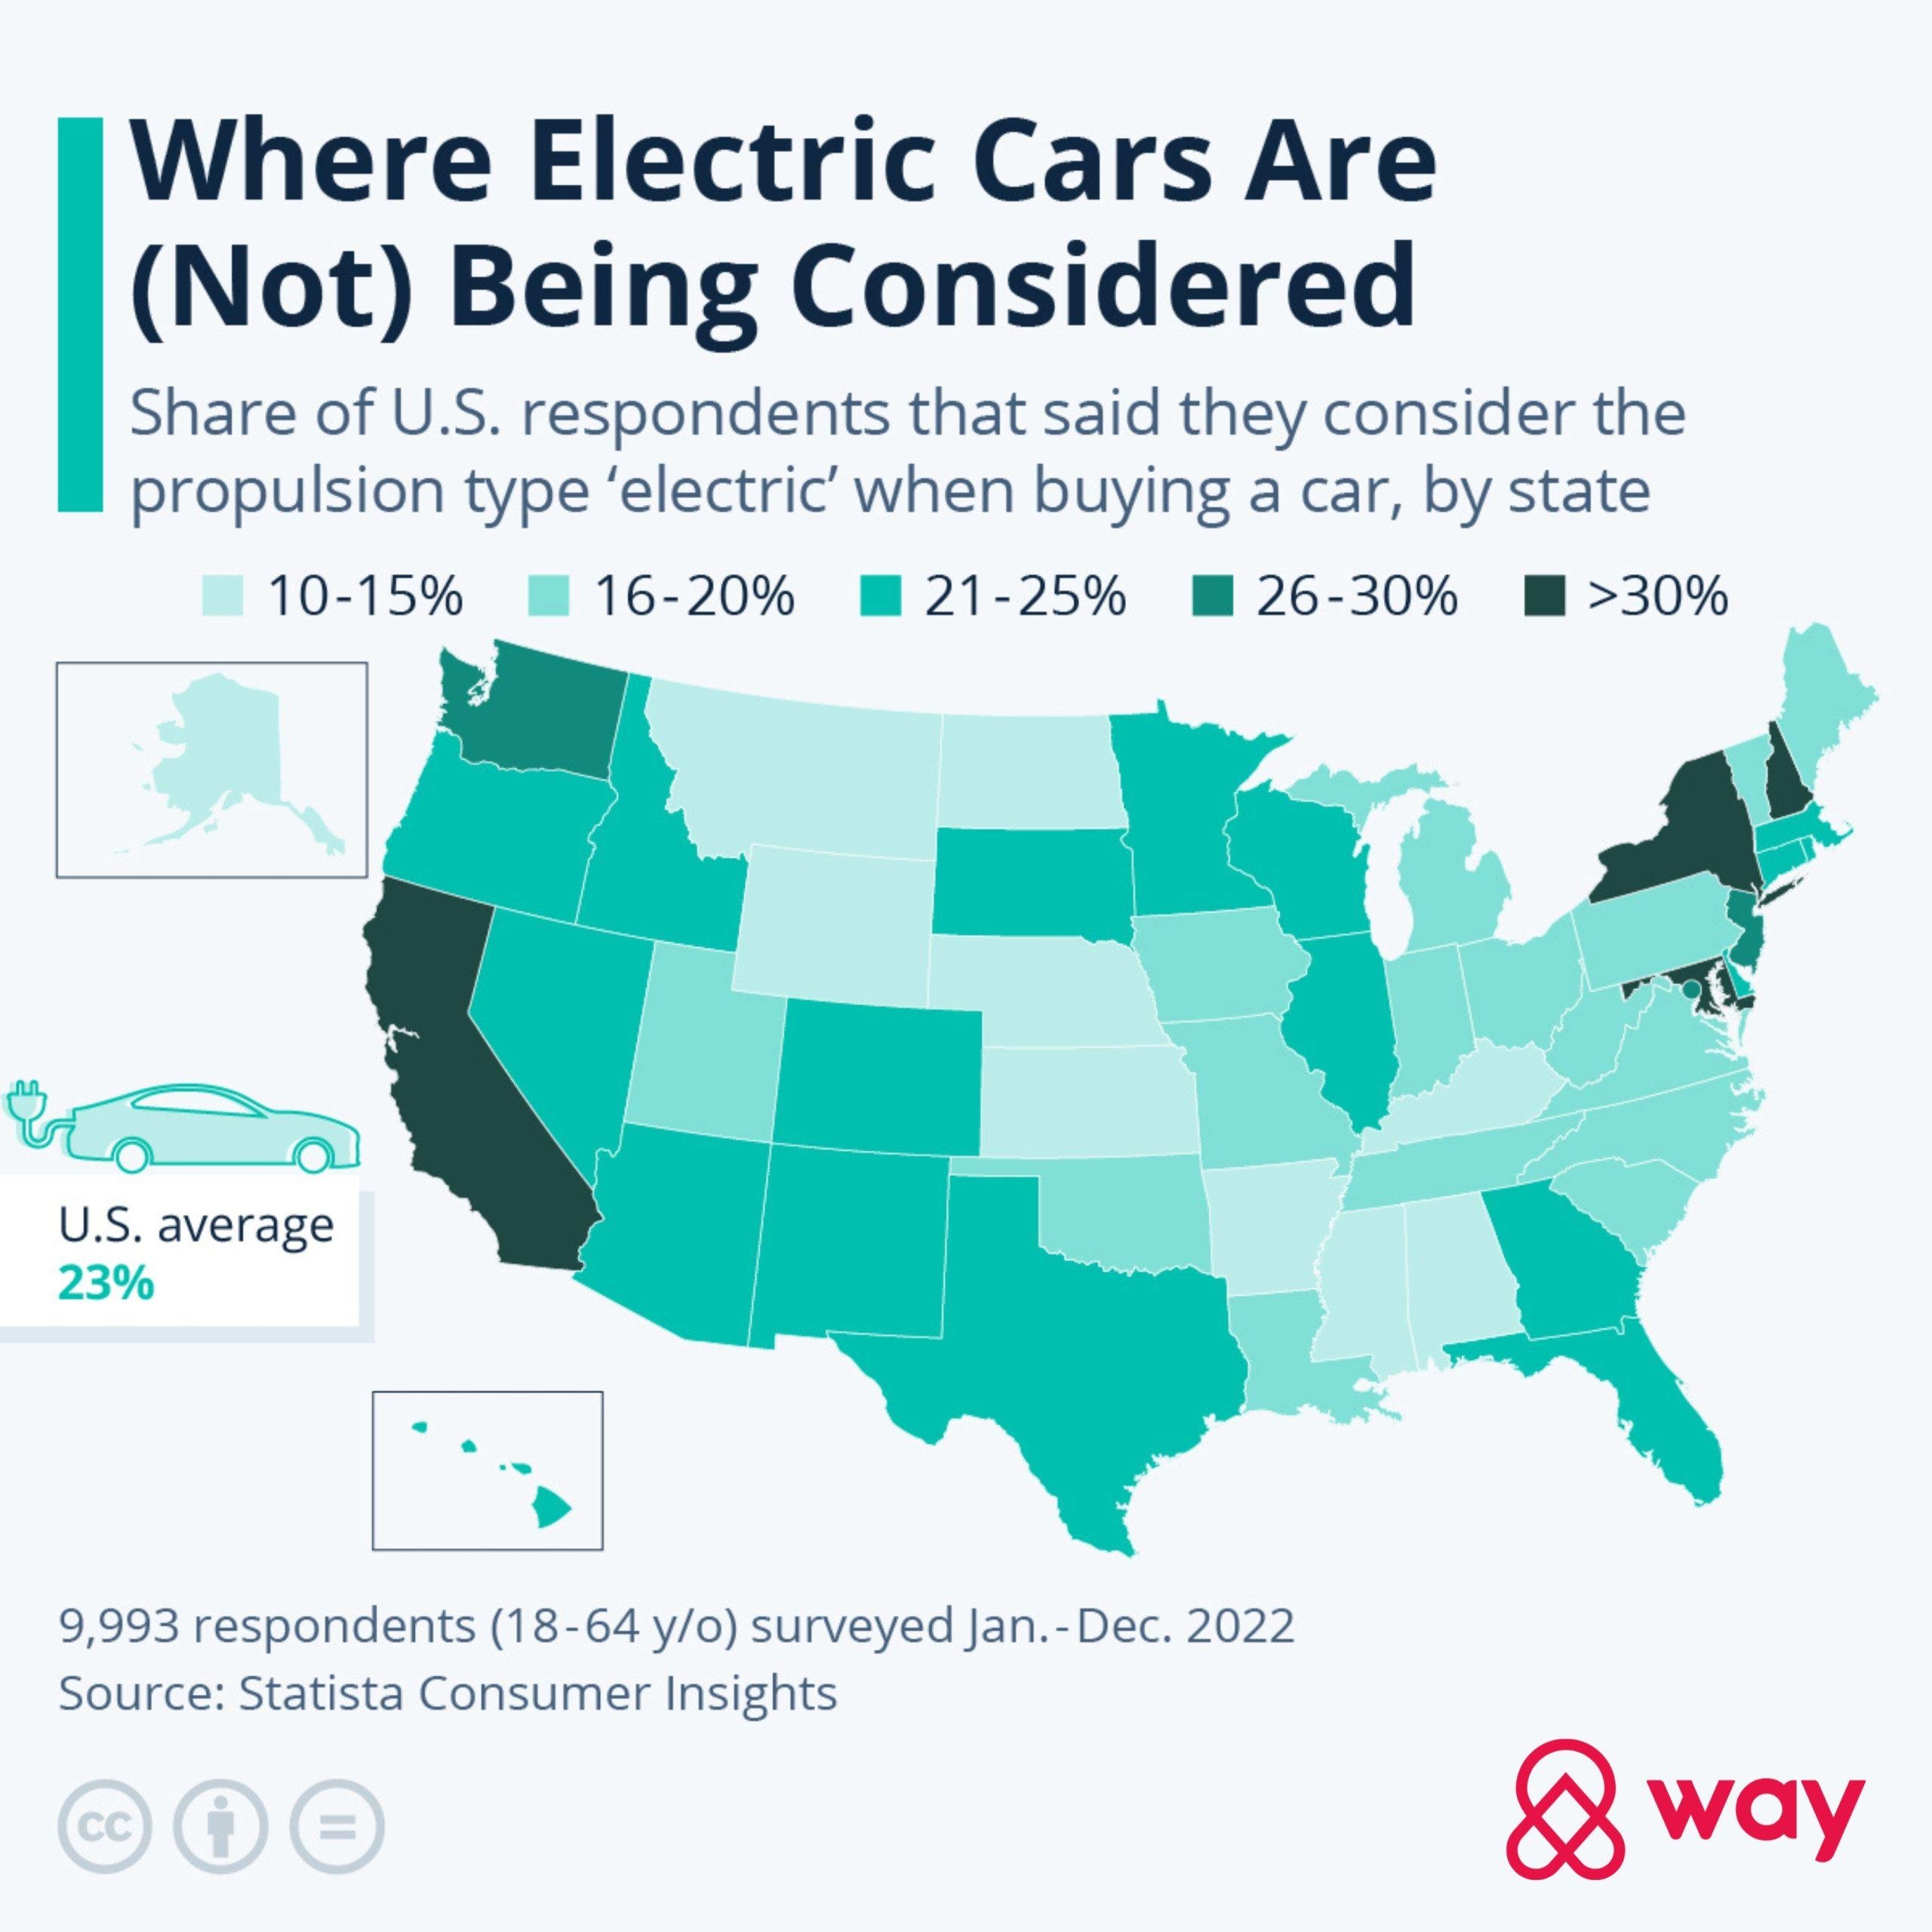 A map of the U.S. showing the percentage of residents who would consider buying an electric car.